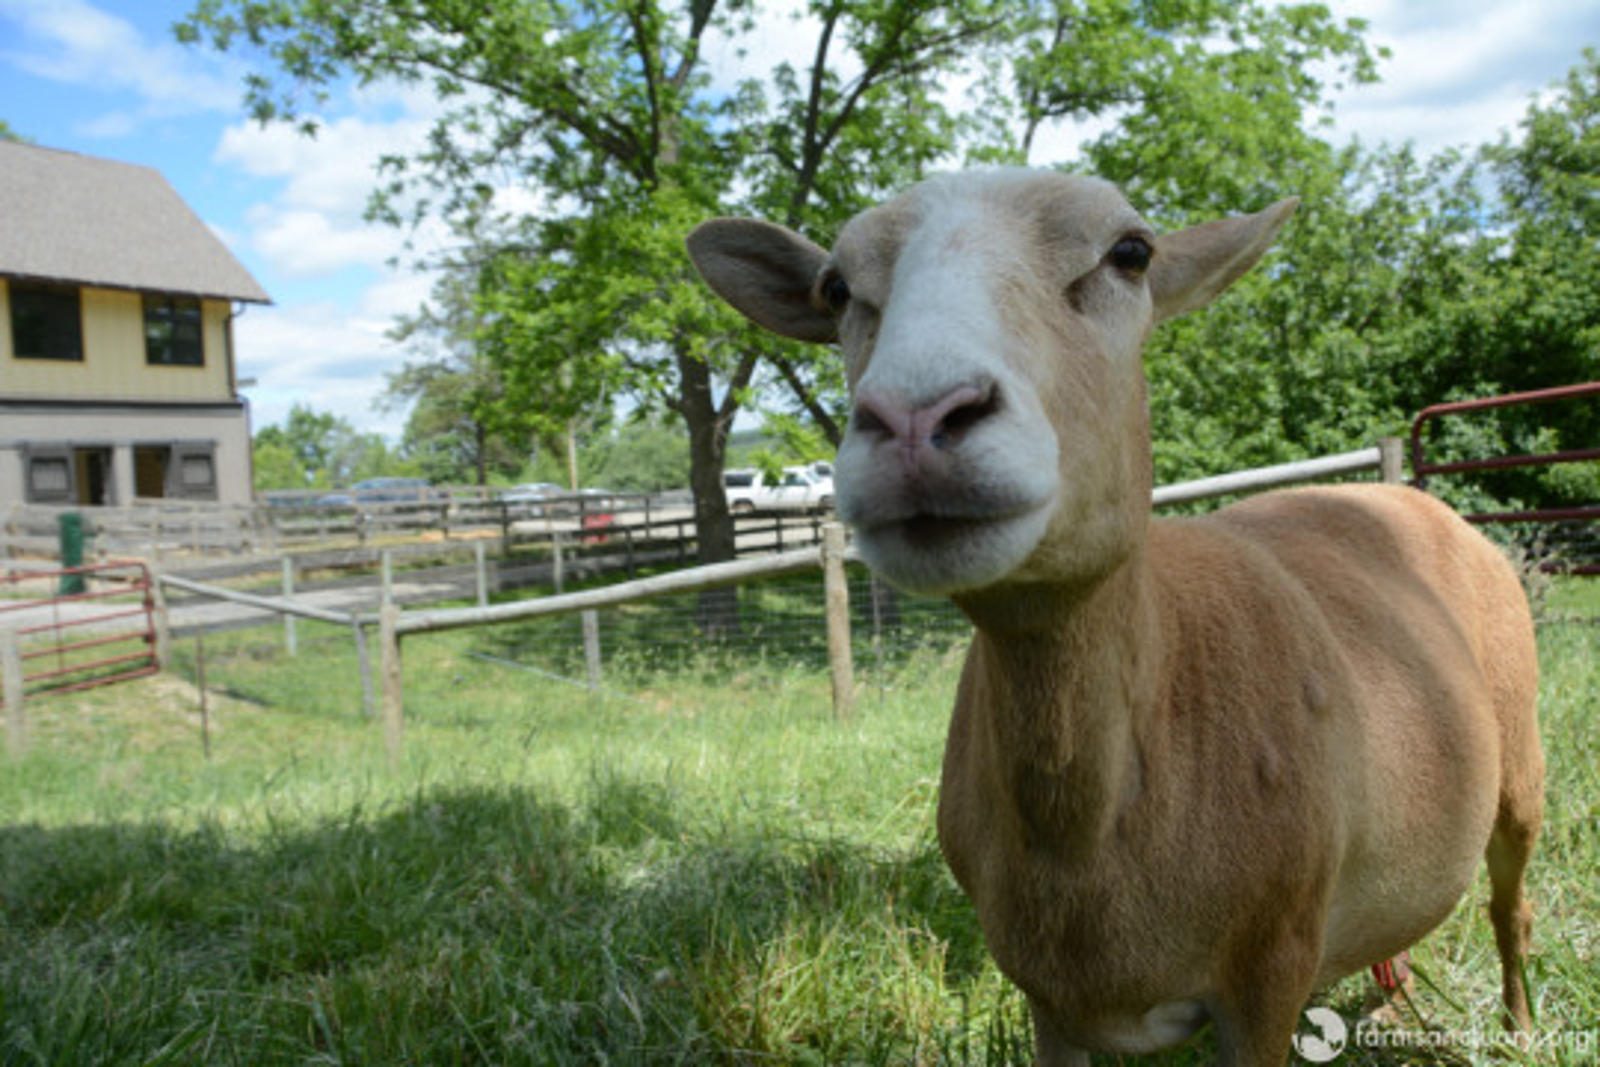 The Sweet Story of How Sheep Rescued From Horrific Abuse Case Learned to Trust Humans Again